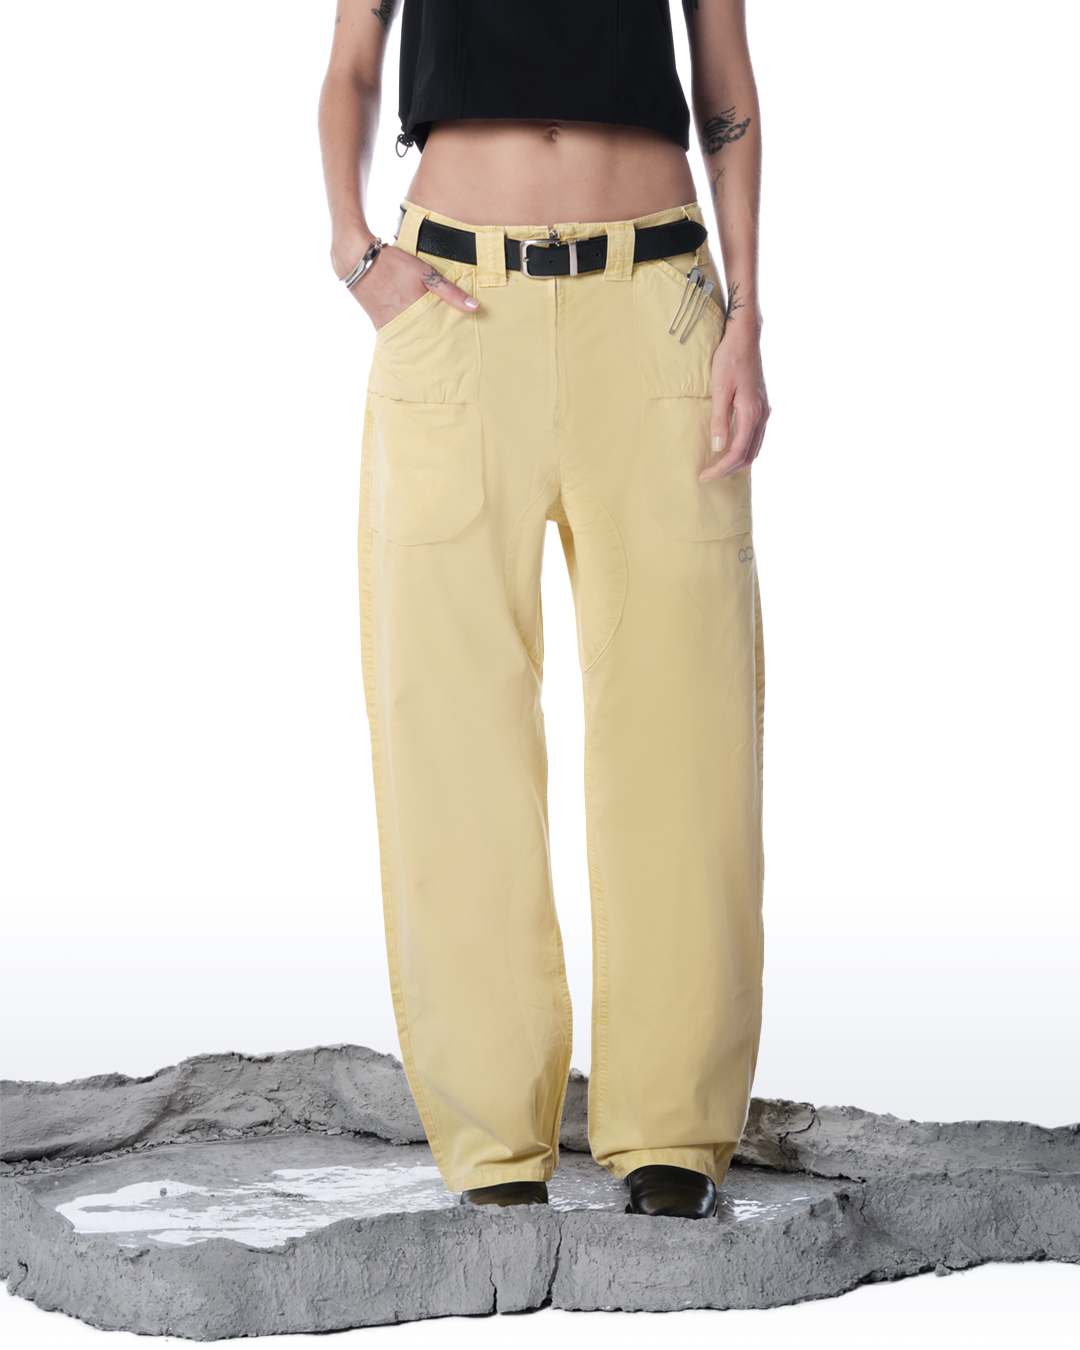 RODES DOUBLE-ZIP YELLOW TROUSERS